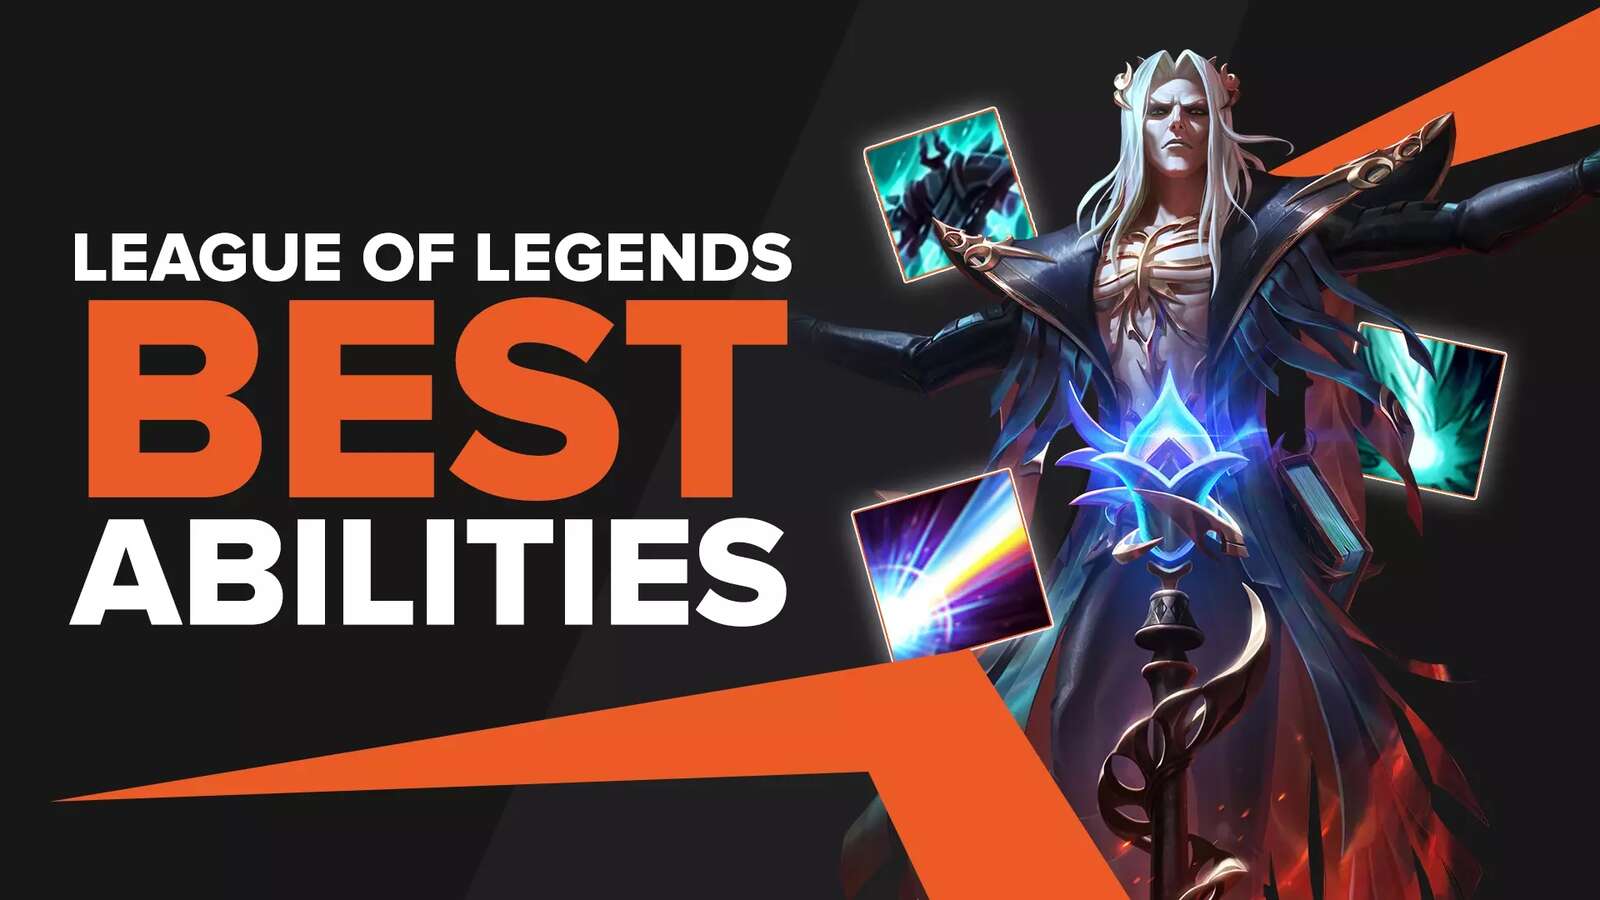 The Best 7 Abilities in League of Legends To Win Games